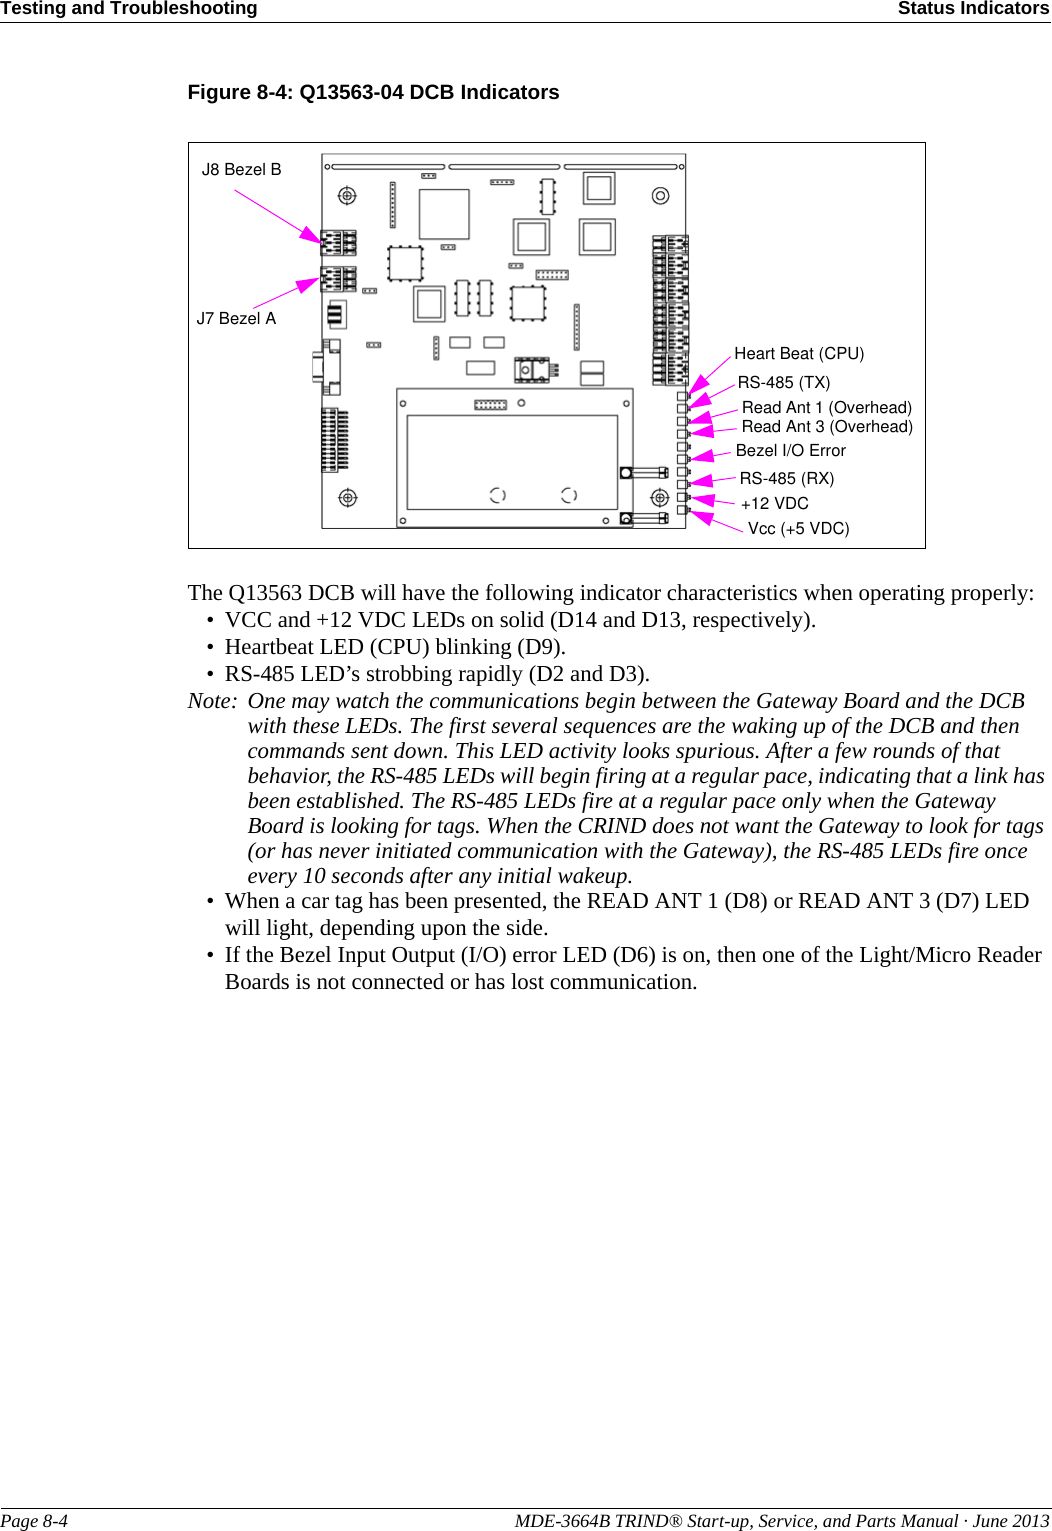 Testing and Troubleshooting Status IndicatorsPage 8-4                                                                                                  MDE-3664B TRIND® Start-up, Service, and Parts Manual · June 2013Figure 8-4: Q13563-04 DCB IndicatorsHeart Beat (CPU)RS-485 (TX)Read Ant 1 (Overhead)Read Ant 3 (Overhead)Bezel I/O ErrorRS-485 (RX)+12 VDCVcc (+5 VDC)J8 Bezel BJ7 Bezel AThe Q13563 DCB will have the following indicator characteristics when operating properly:• VCC and +12 VDC LEDs on solid (D14 and D13, respectively).• Heartbeat LED (CPU) blinking (D9).• RS-485 LED’s strobbing rapidly (D2 and D3).Note: One may watch the communications begin between the Gateway Board and the DCB with these LEDs. The first several sequences are the waking up of the DCB and then commands sent down. This LED activity looks spurious. After a few rounds of that behavior, the RS-485 LEDs will begin firing at a regular pace, indicating that a link has been established. The RS-485 LEDs fire at a regular pace only when the Gateway Board is looking for tags. When the CRIND does not want the Gateway to look for tags (or has never initiated communication with the Gateway), the RS-485 LEDs fire once every 10 seconds after any initial wakeup.• When a car tag has been presented, the READ ANT 1 (D8) or READ ANT 3 (D7) LED will light, depending upon the side. • If the Bezel Input Output (I/O) error LED (D6) is on, then one of the Light/Micro Reader Boards is not connected or has lost communication.